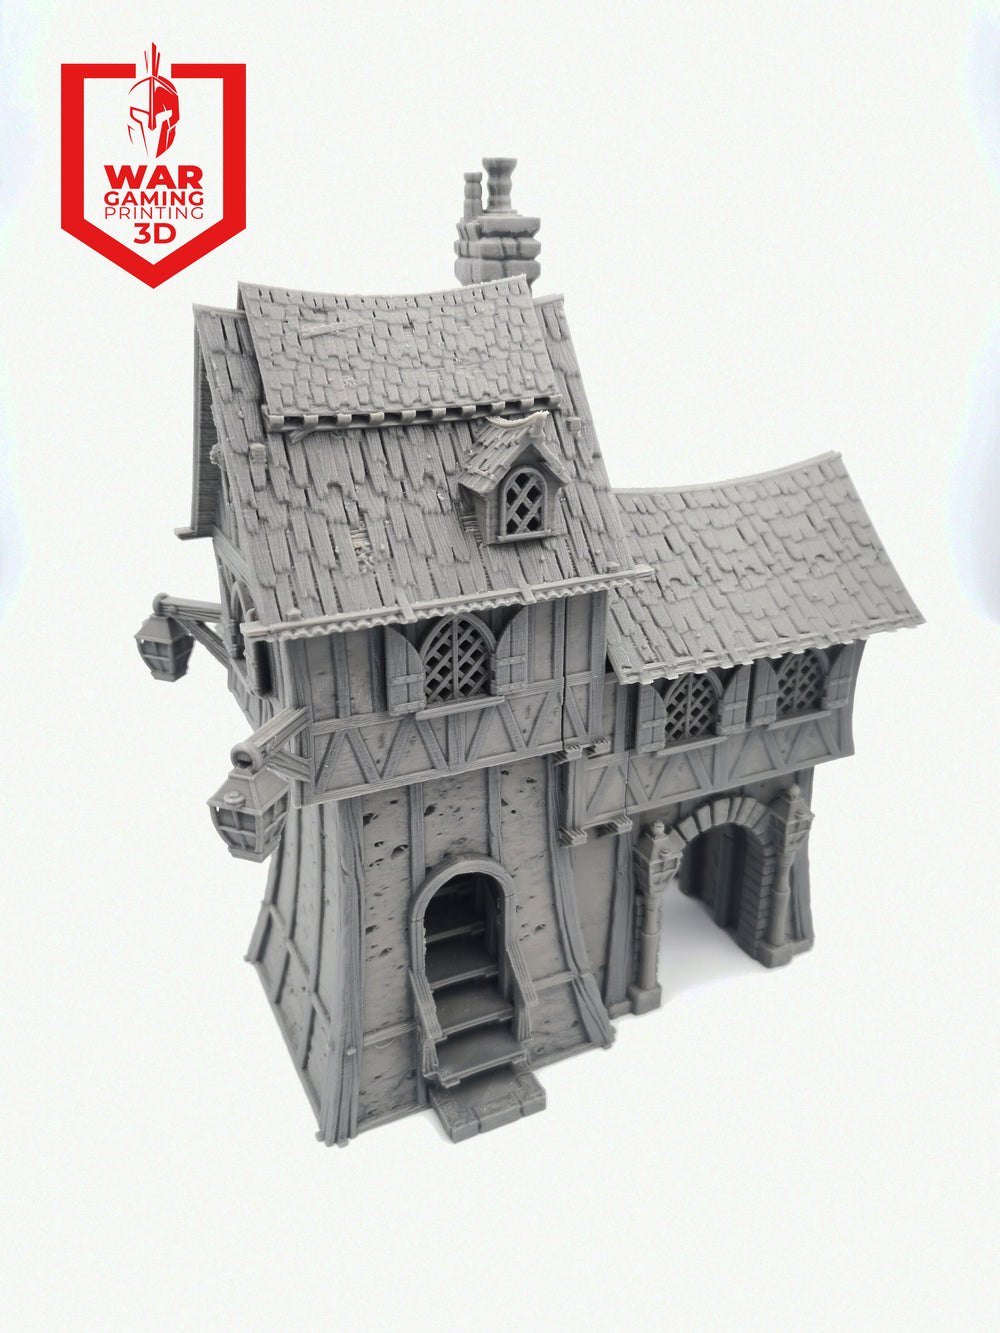 The Frost fantasy town Oldkeep barracks